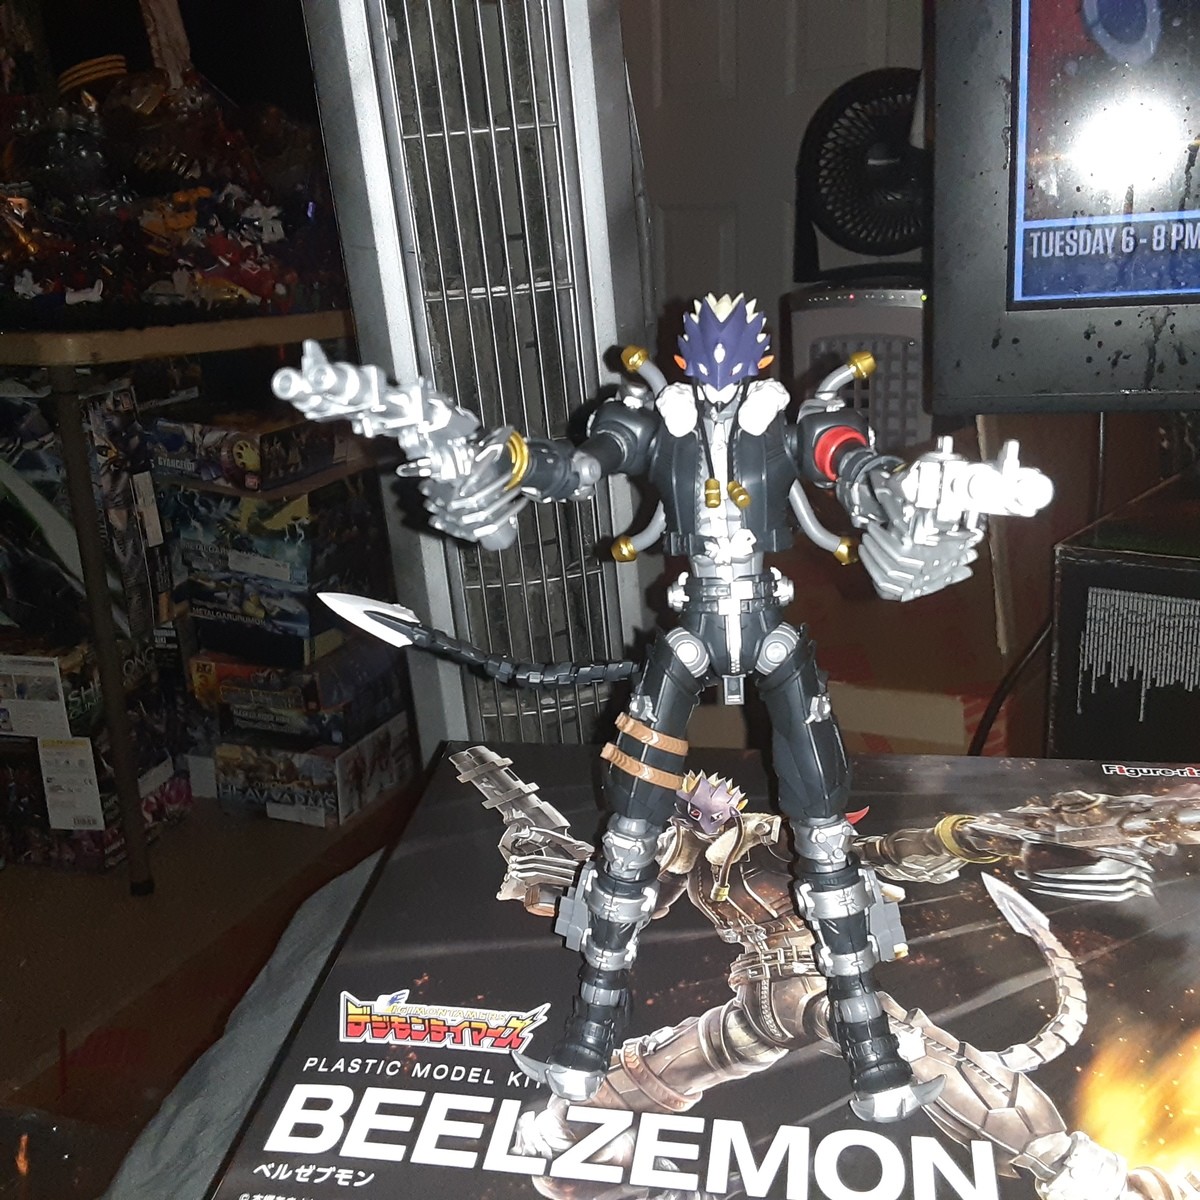 Beelzemon model. Impmon had a great arc in the show and this model is really good now I want to make another of his burst mode.. oh nioce they make digimon models?